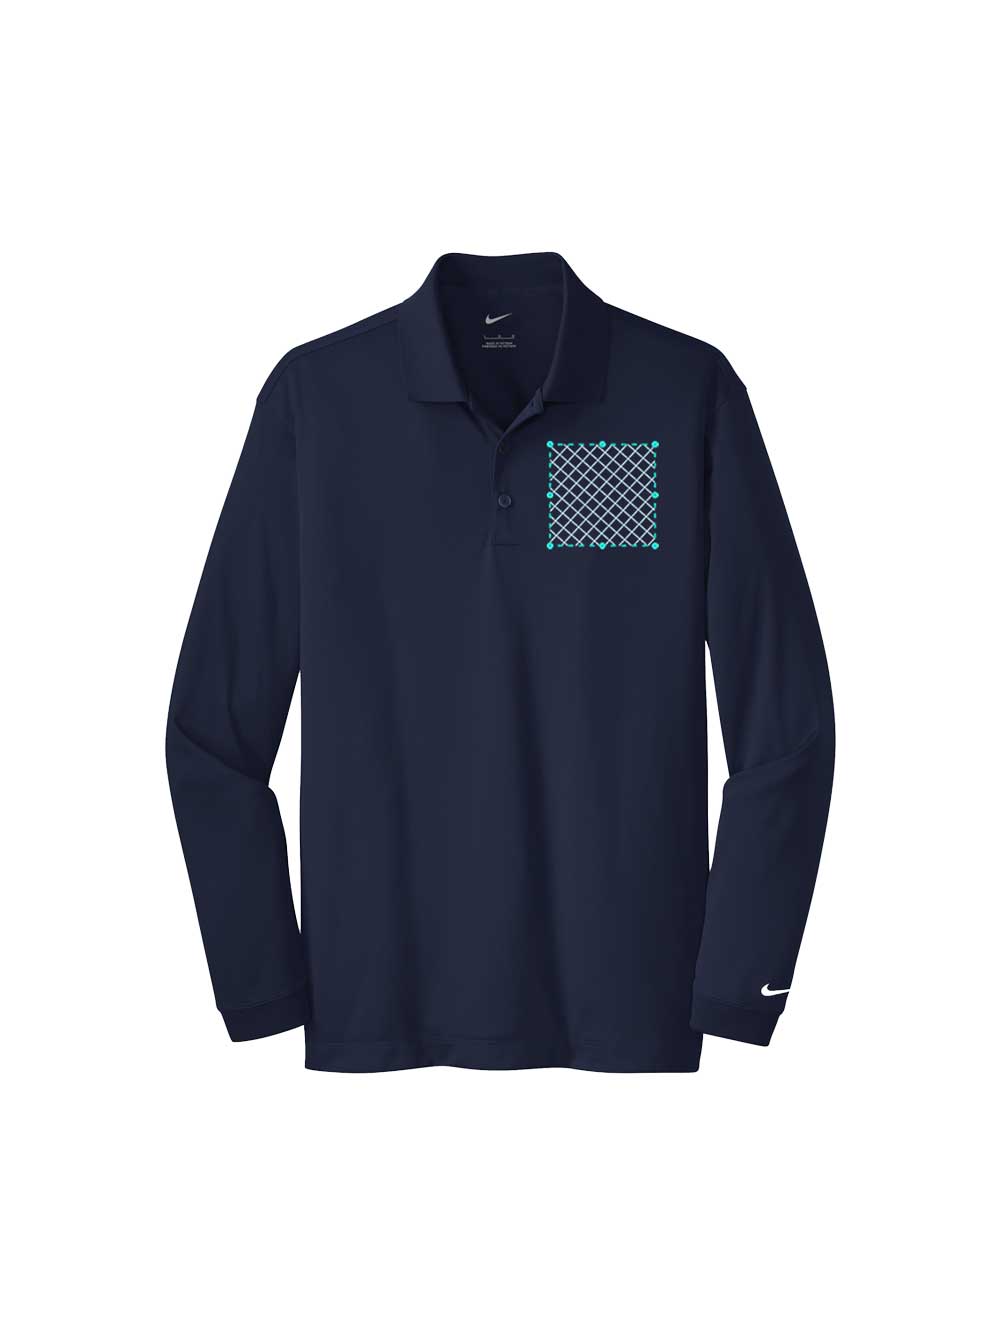 Embroidered Nike Long Sleeve Dri-FIT Stretch Tech Polo